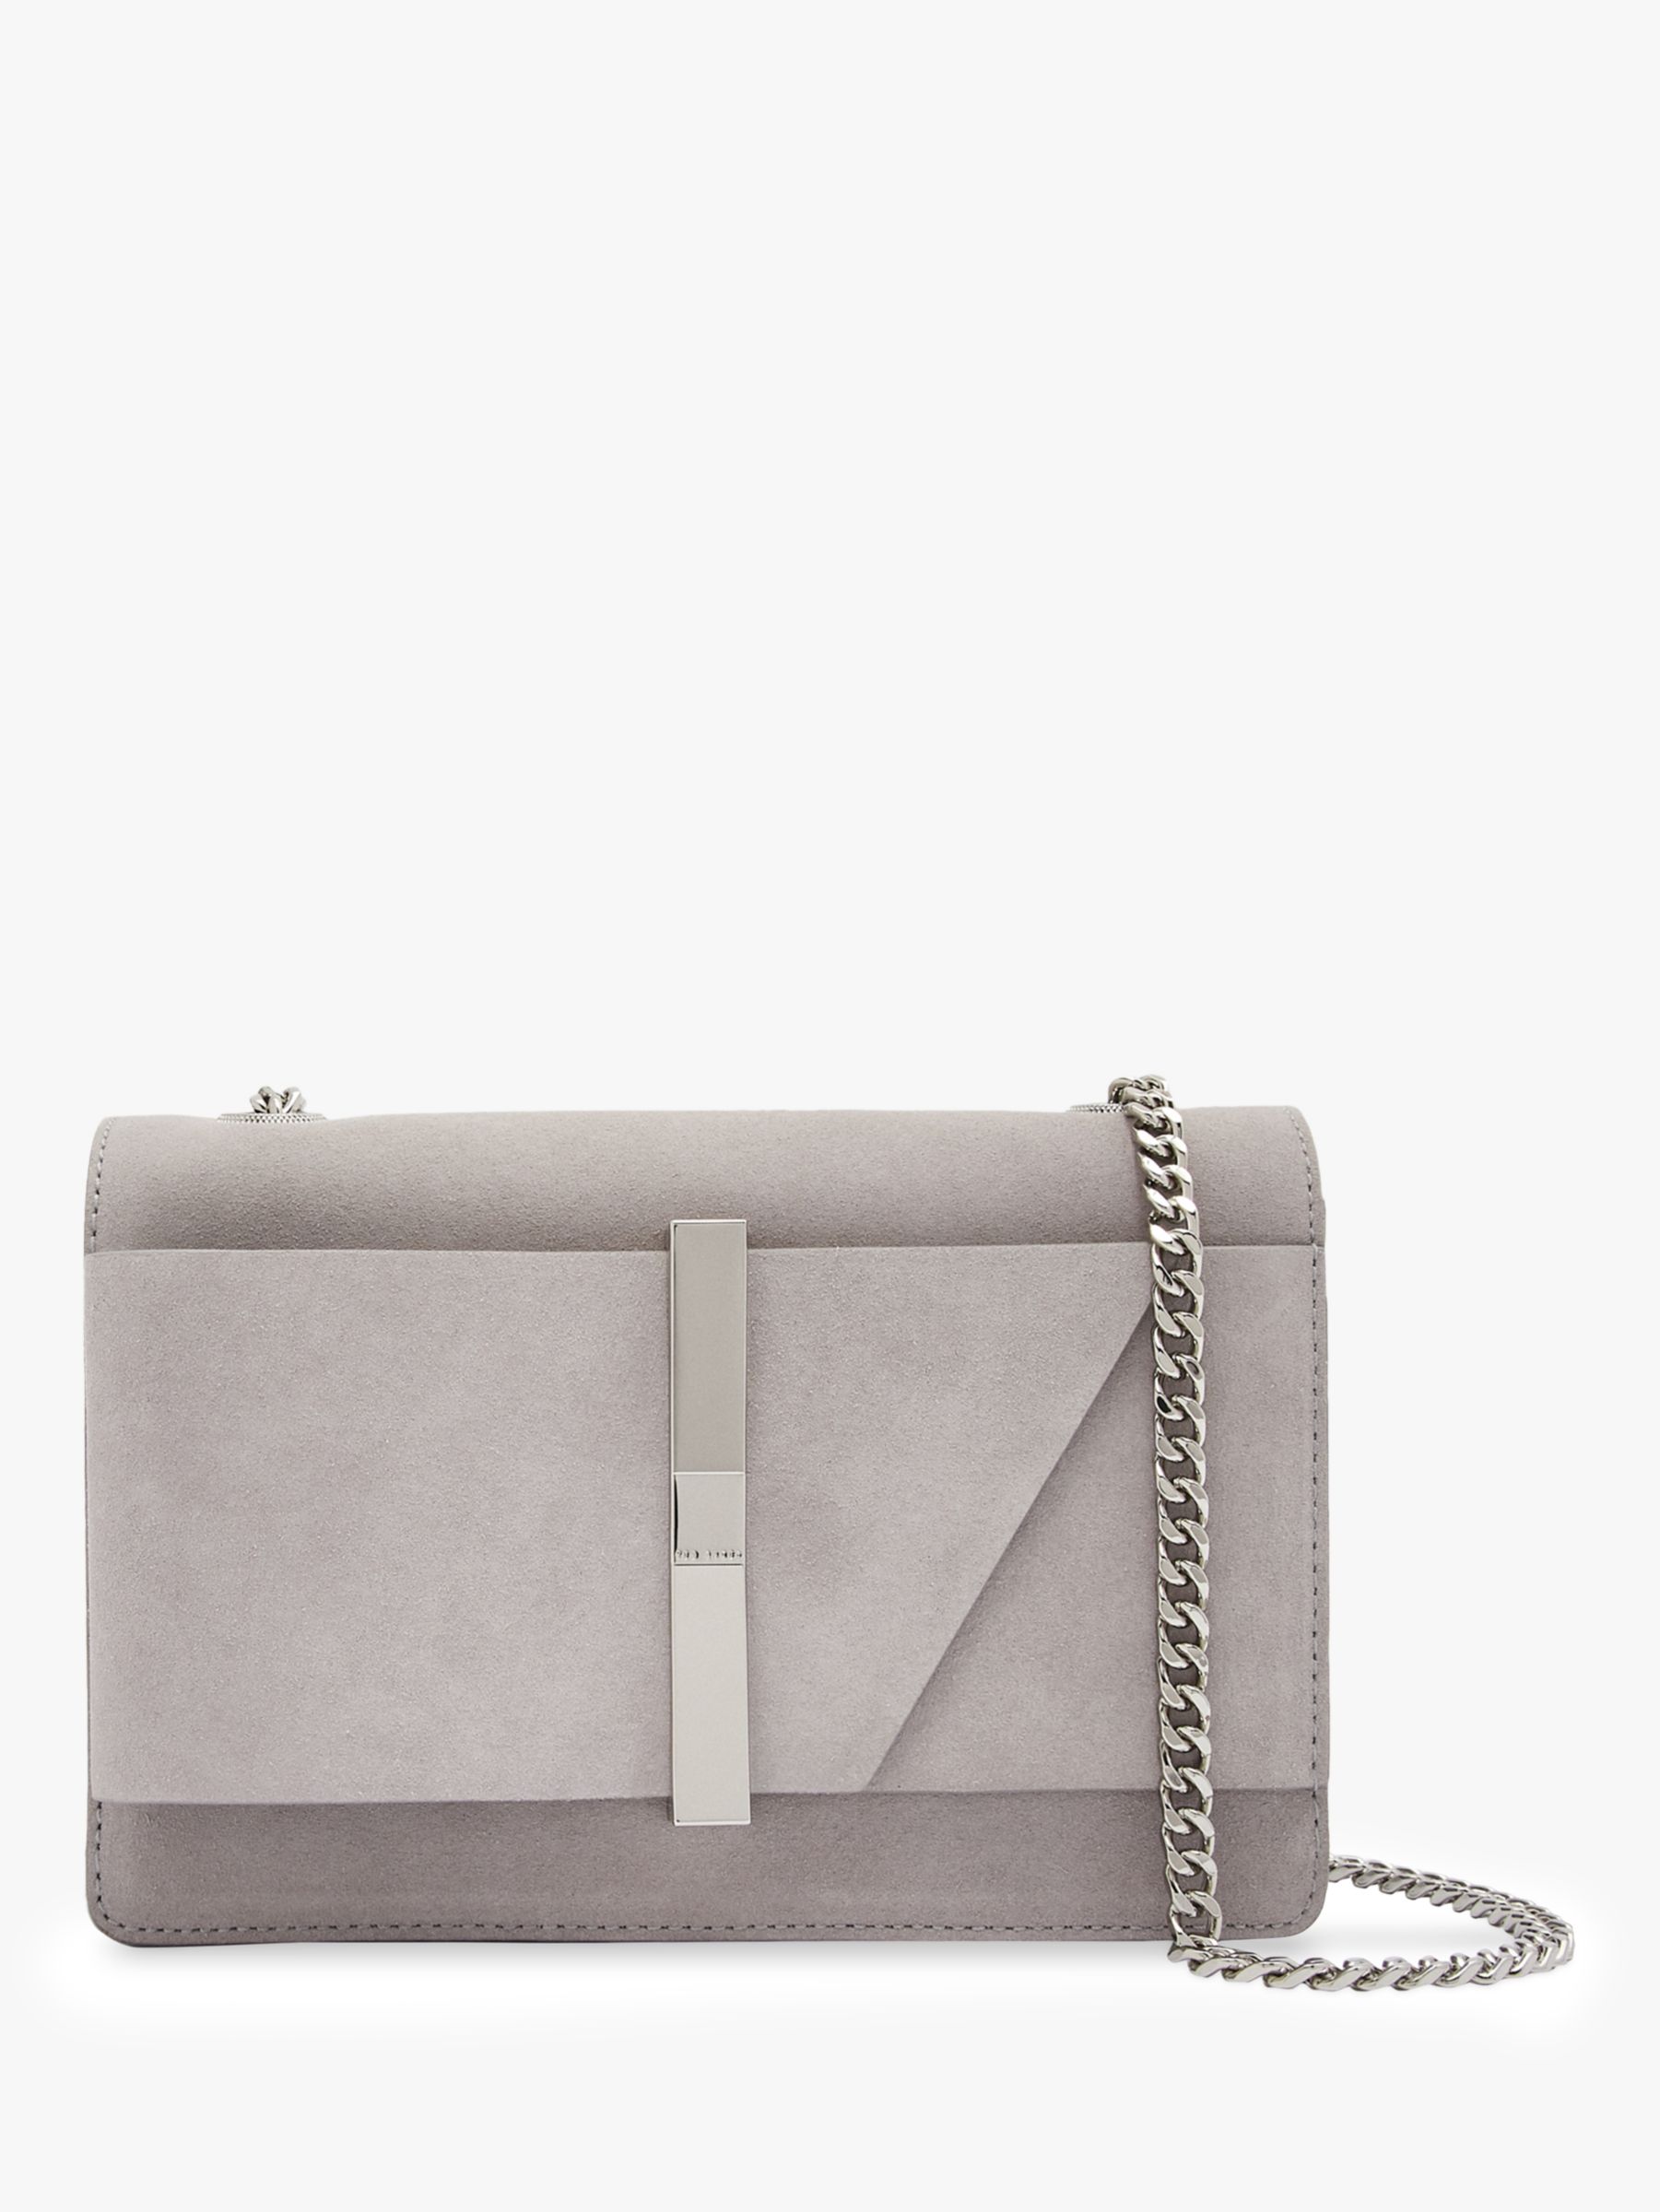 Ted Baker Caliee Mini Leather Cross Body Bag at John Lewis & Partners